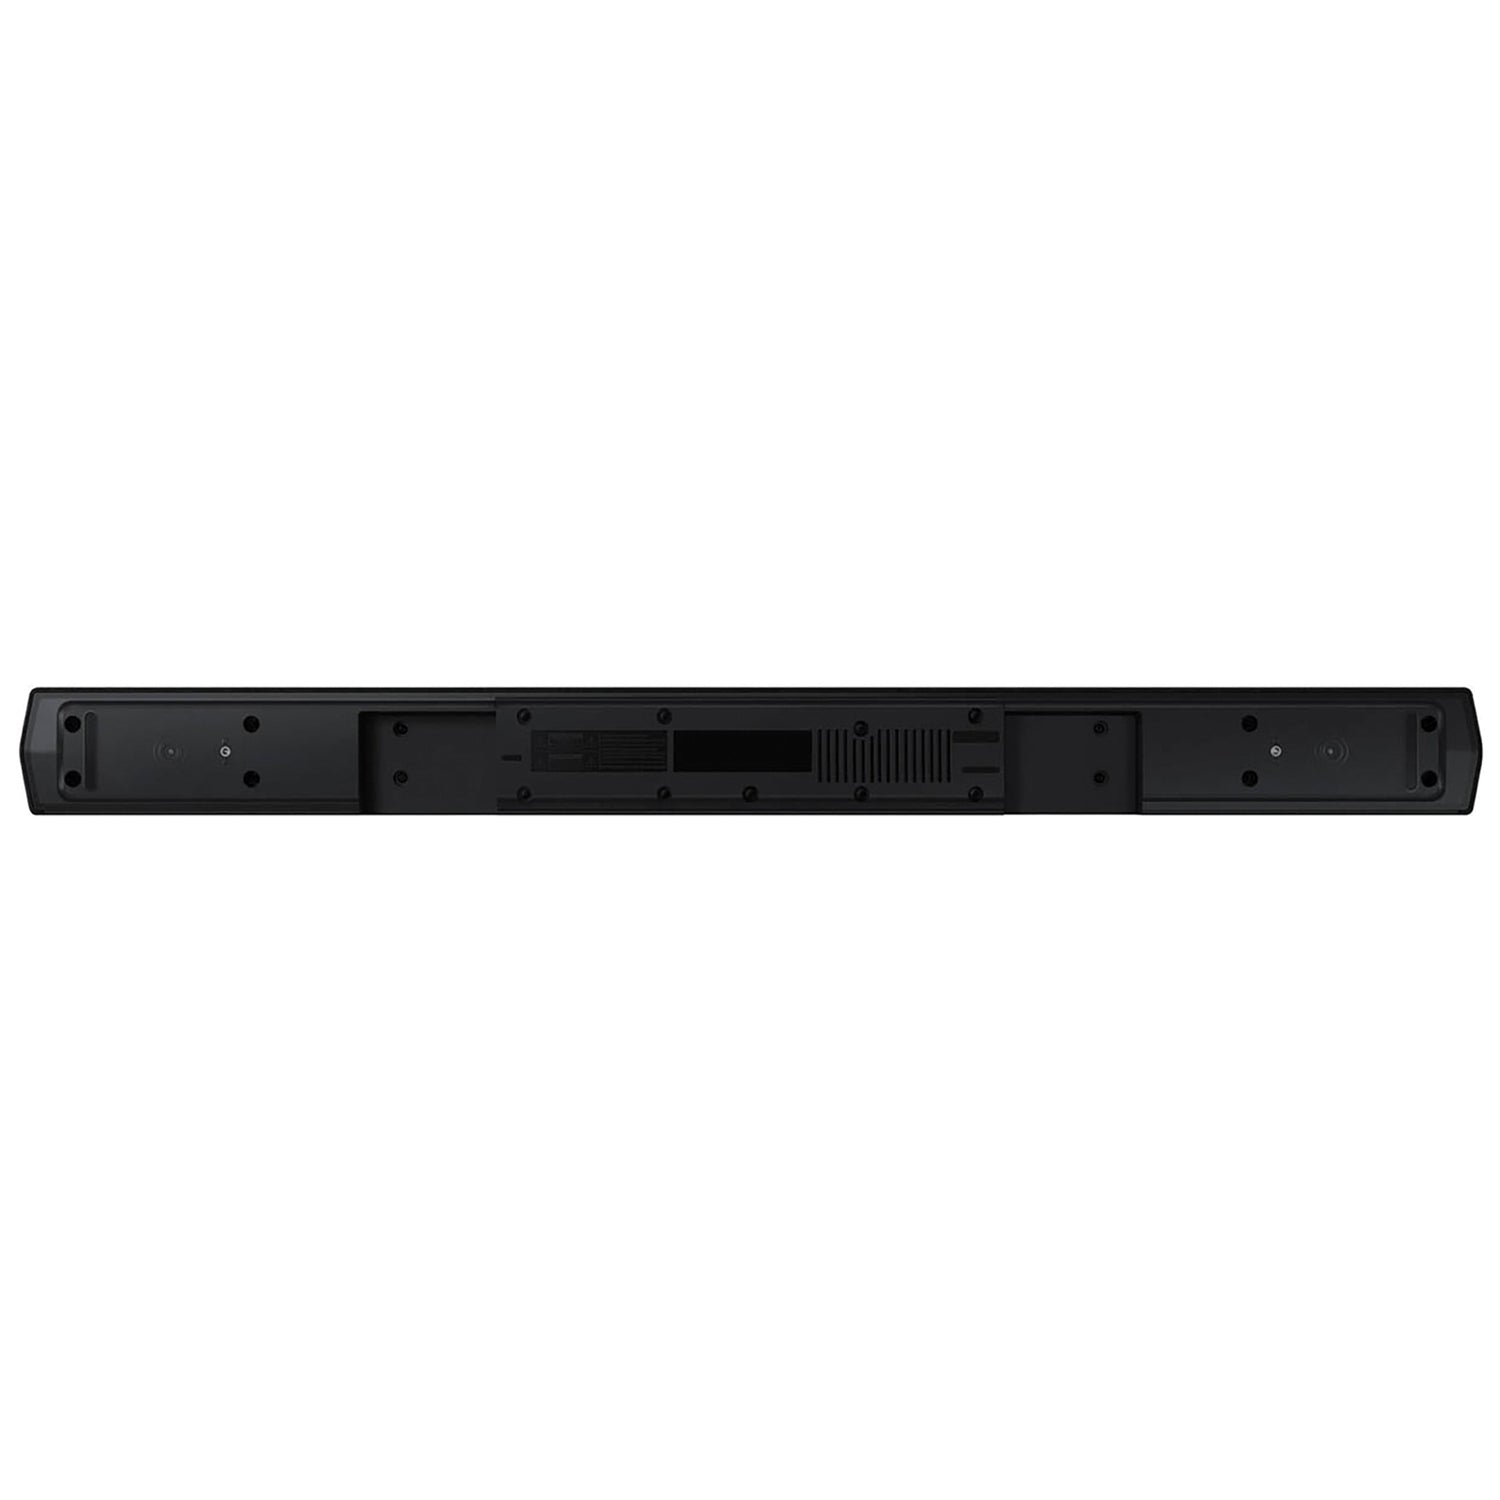 Samsung HW-B450/ZP Bluetooth 2.1-Channel Dolby Audio/DTS 33.8-In. Sound Bar, with Wireless Subwoofer, Black